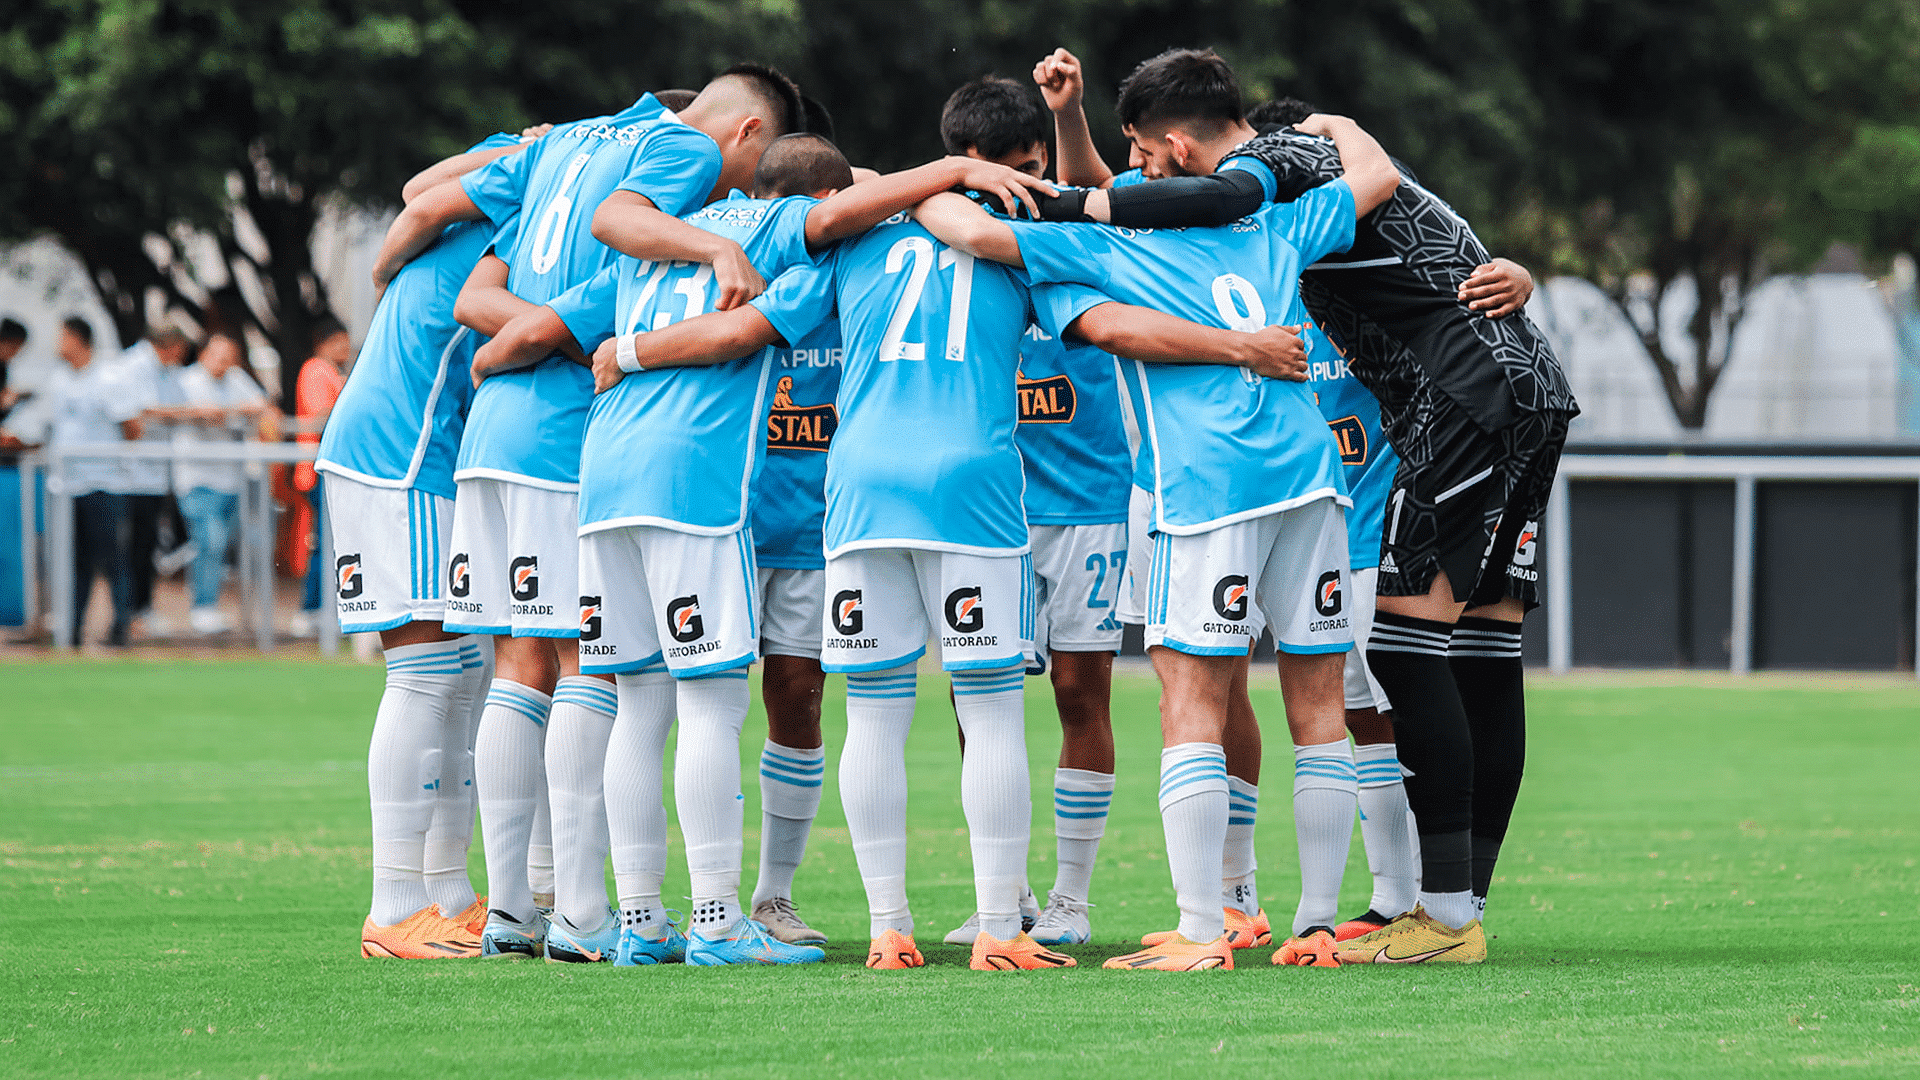 You are currently viewing Metodo Celeste: MBP’s third visit to Sporting Cristal